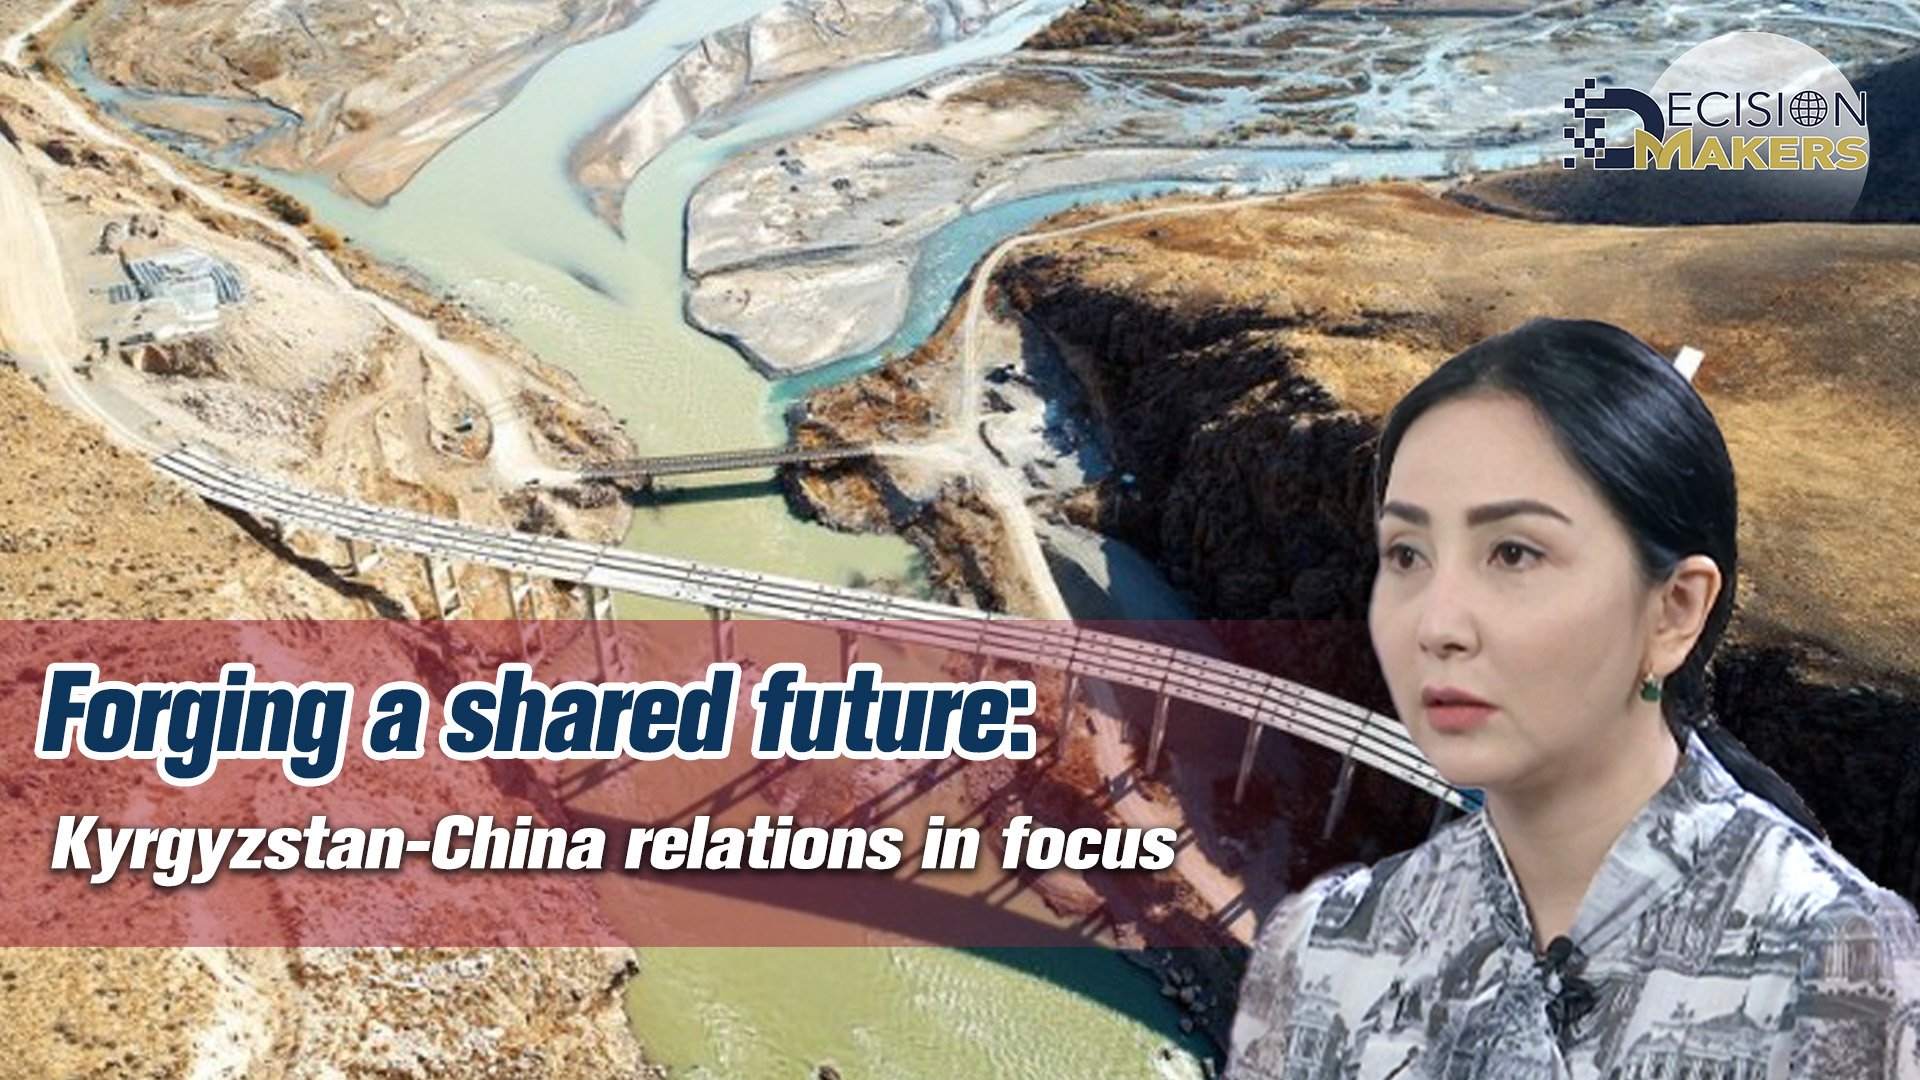 Forging a shared future: Kyrgyzstan-China relations in focus